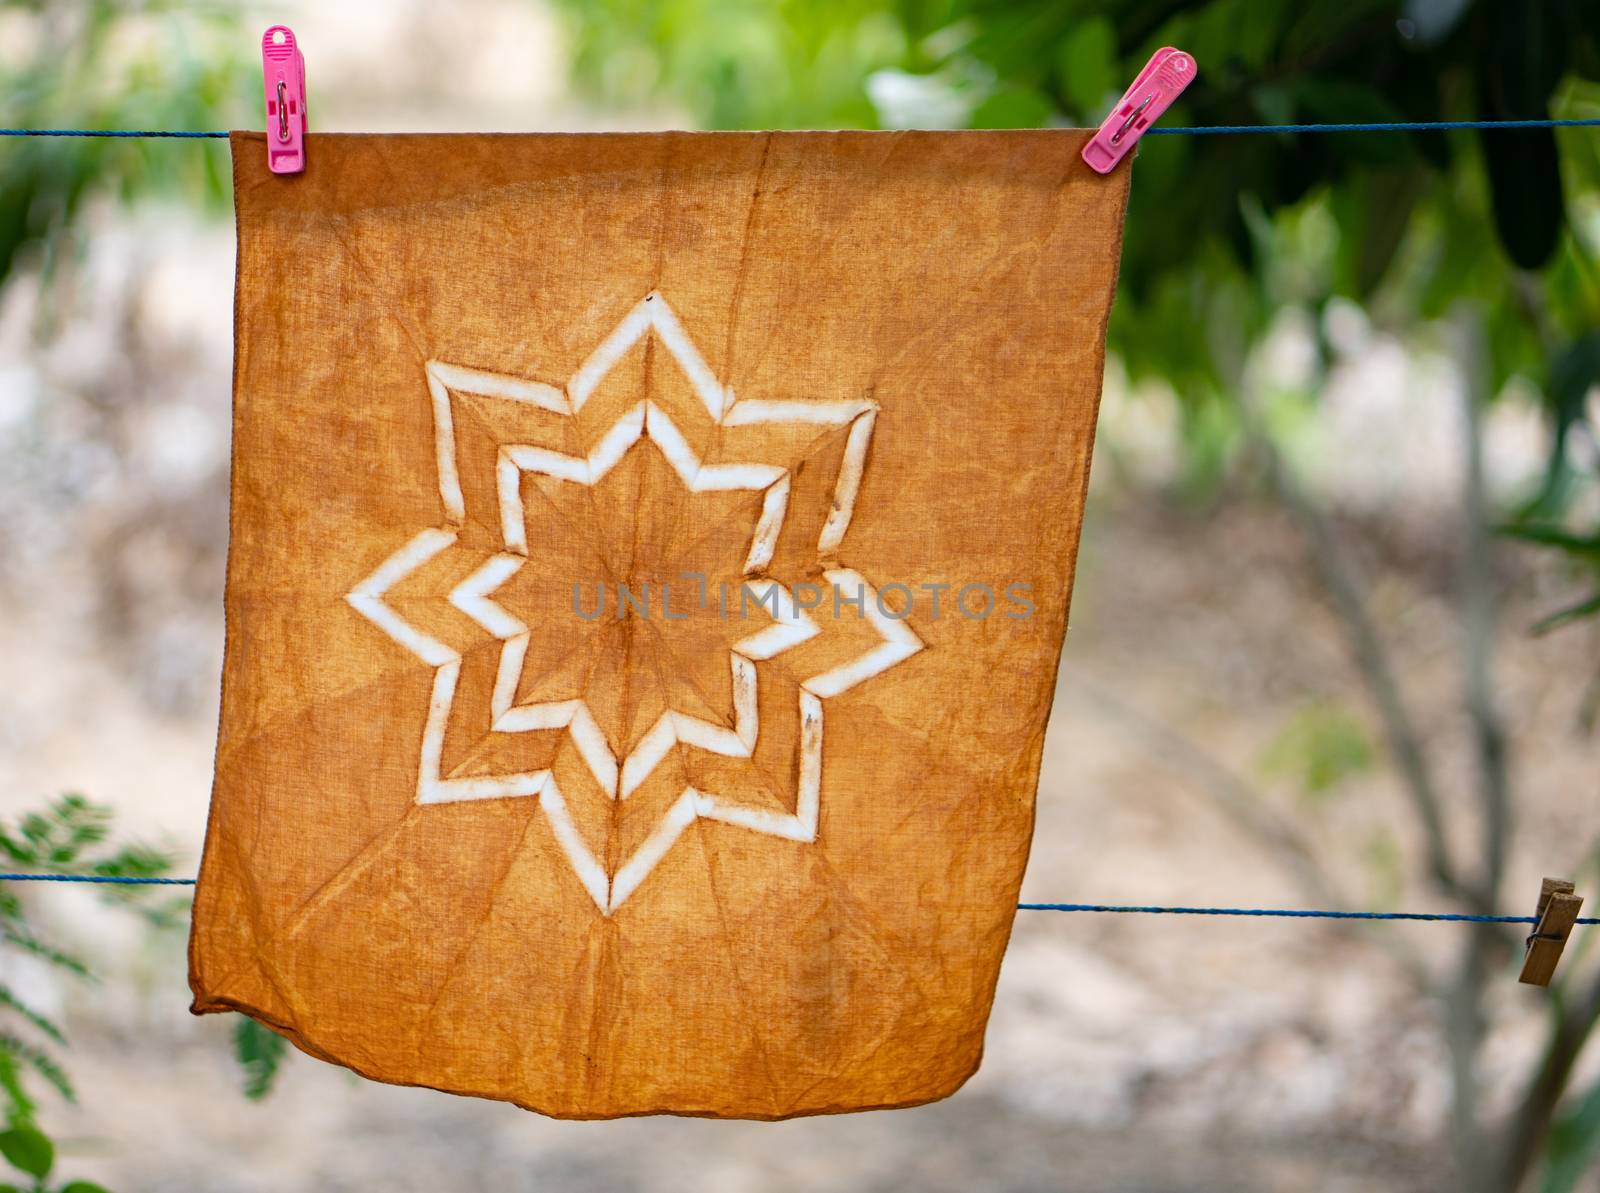 Dyed batik cloth hanging in the outdoor garden. by pkproject